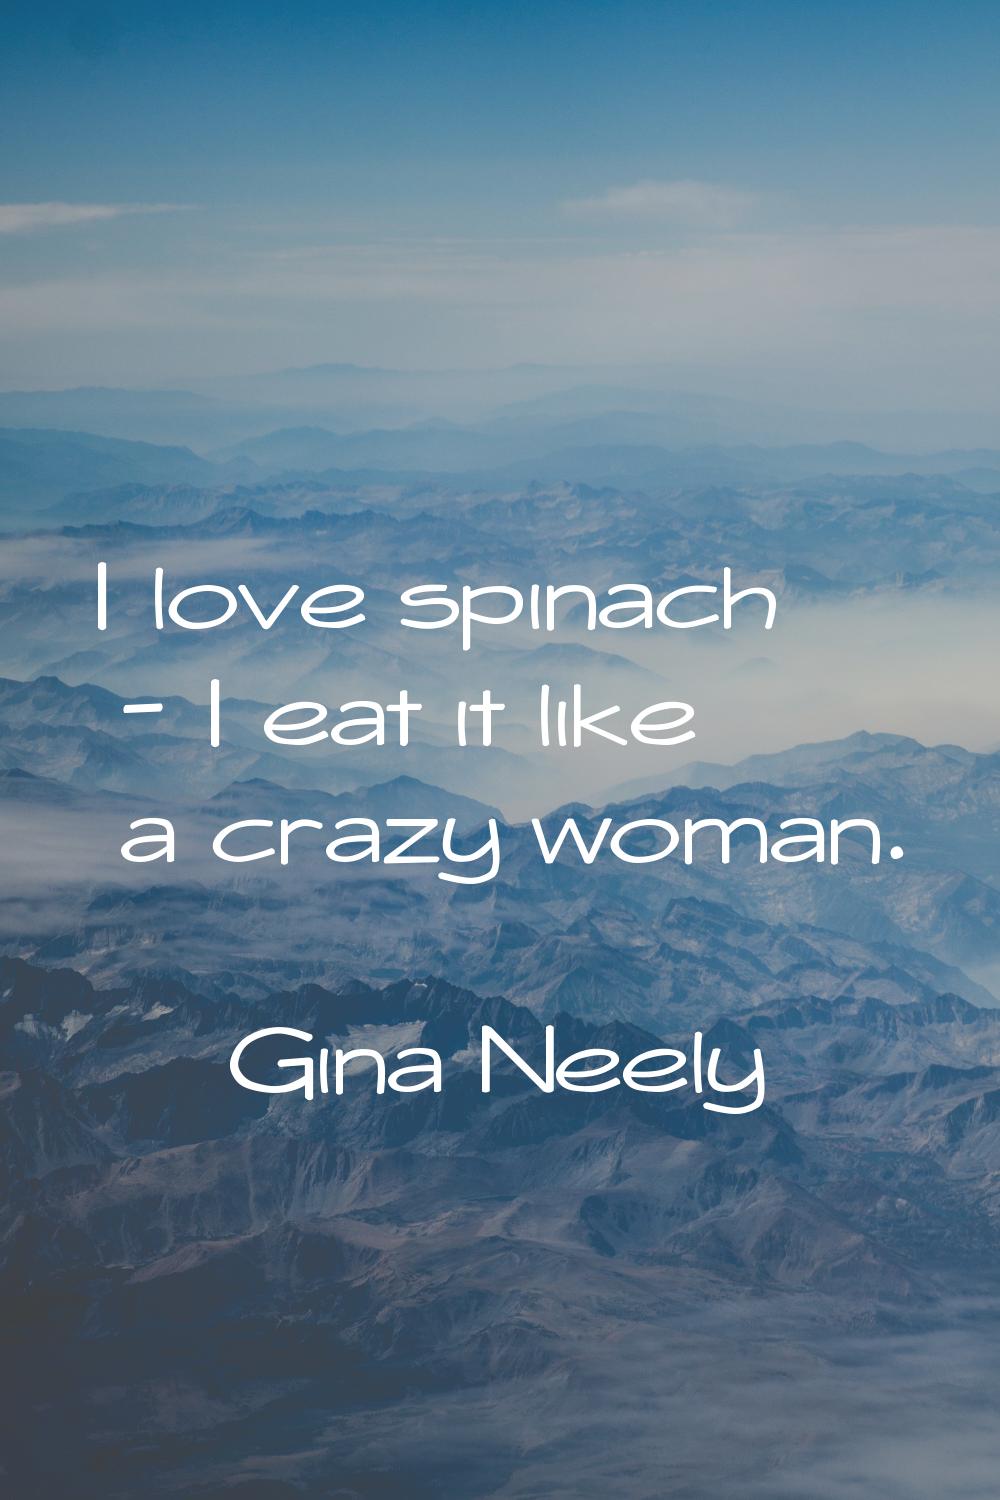 I love spinach - I eat it like a crazy woman.